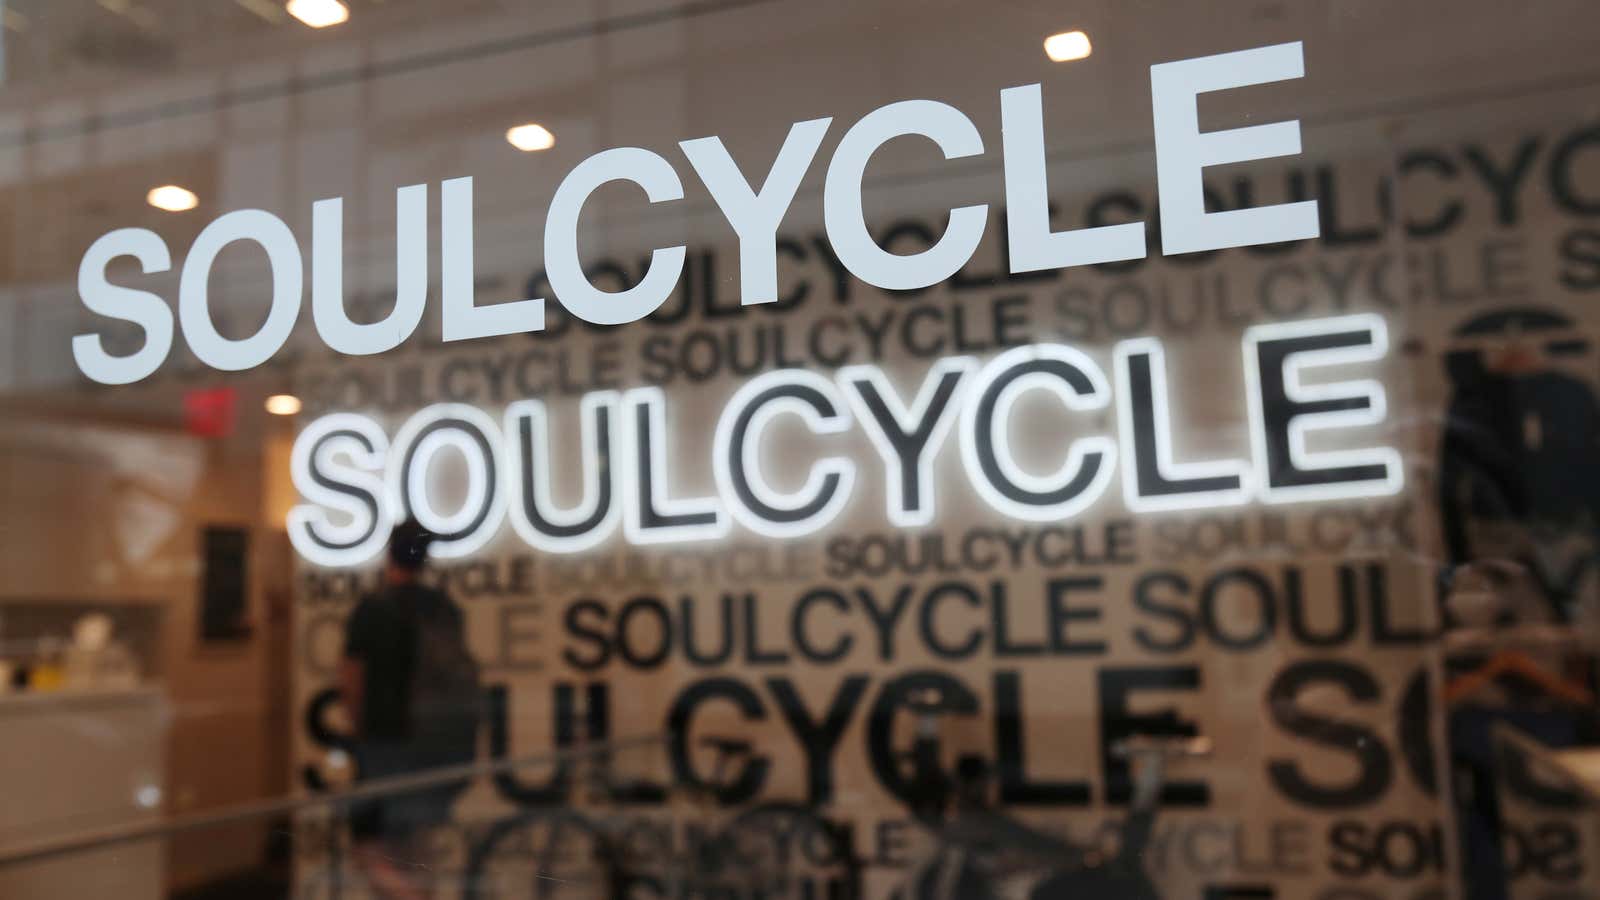 The sign for SoulCycle is seen at the entrance to the fitness chain in New York City, U.S., August 8, 2019.